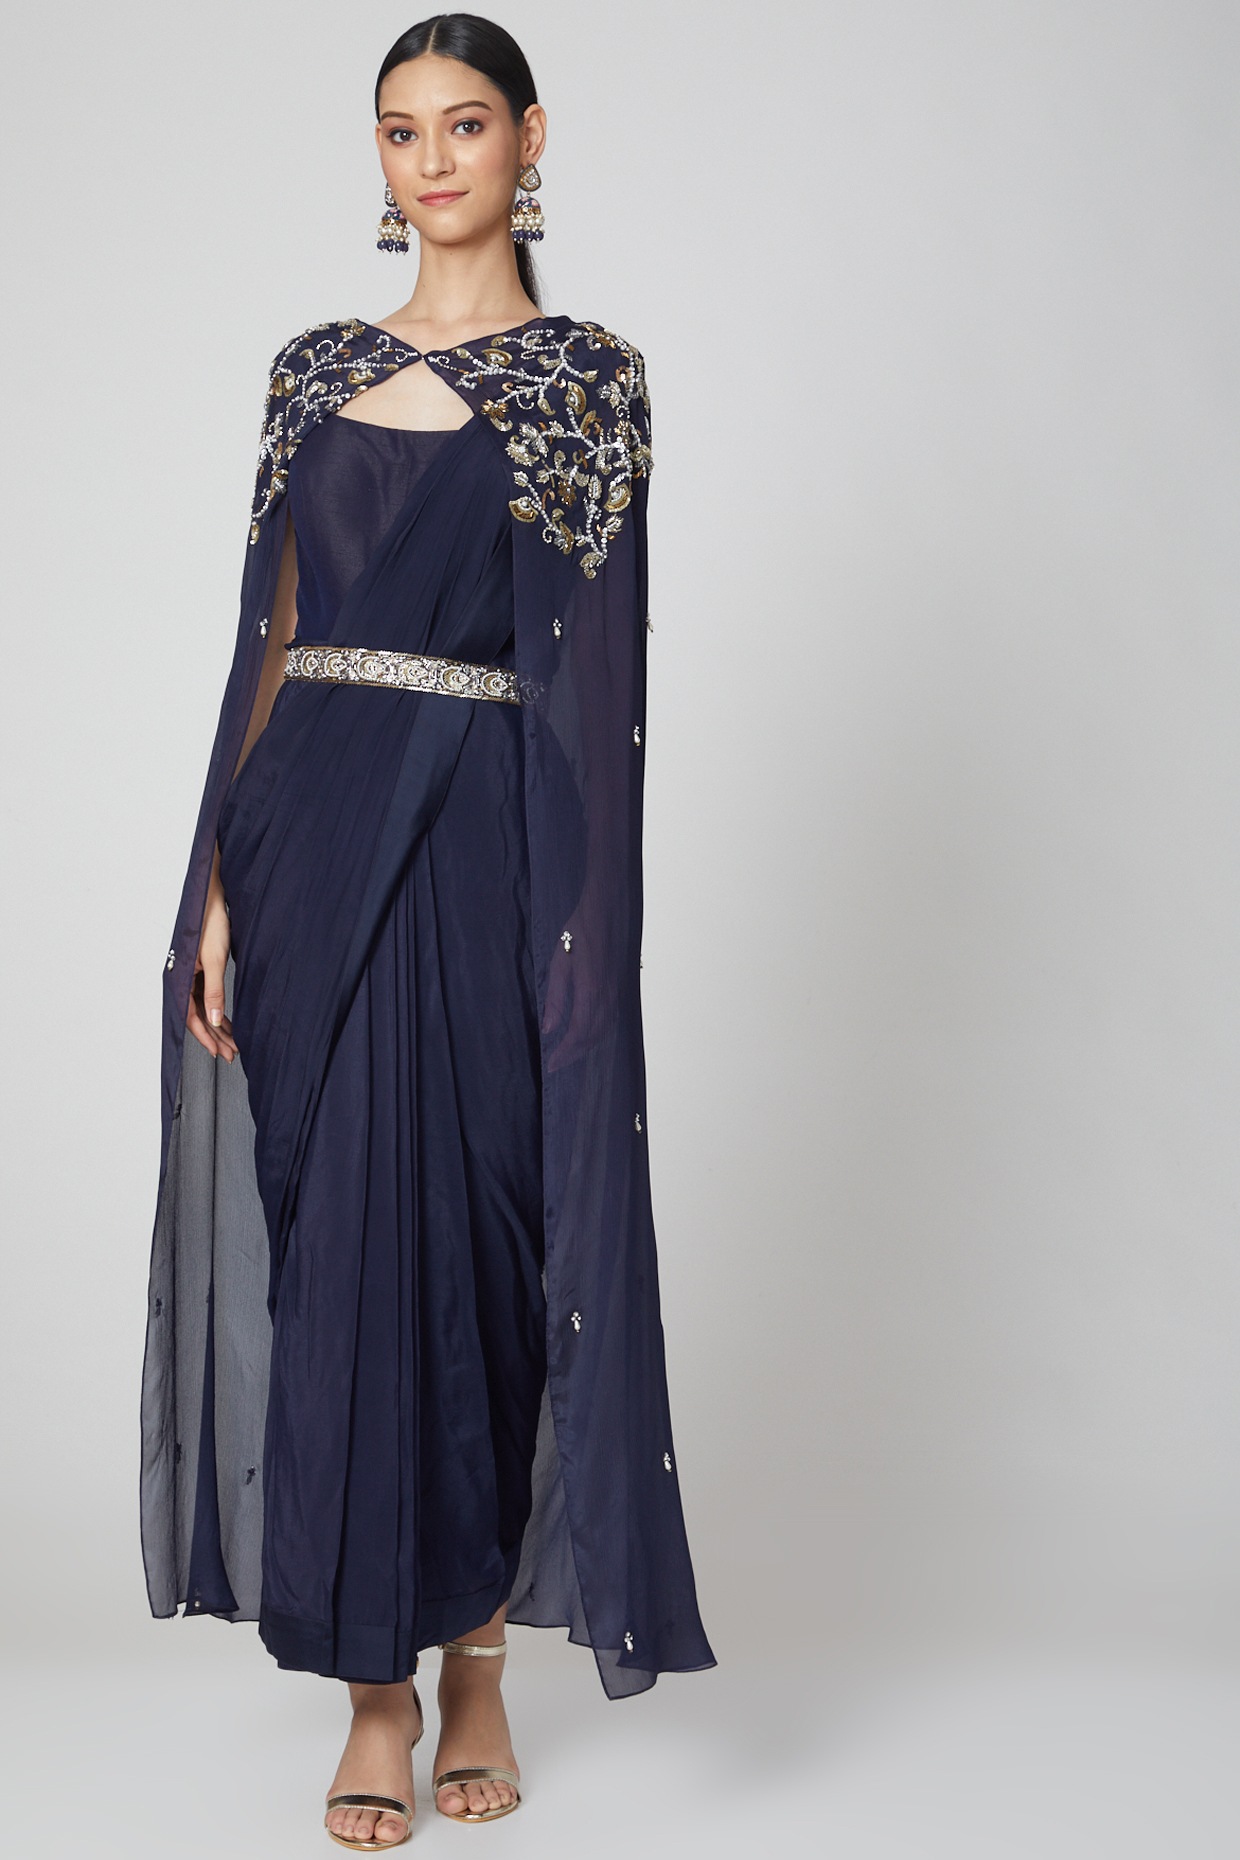 Blue embroidered sari gown | Drape gowns, Saree gowns, Saree gown